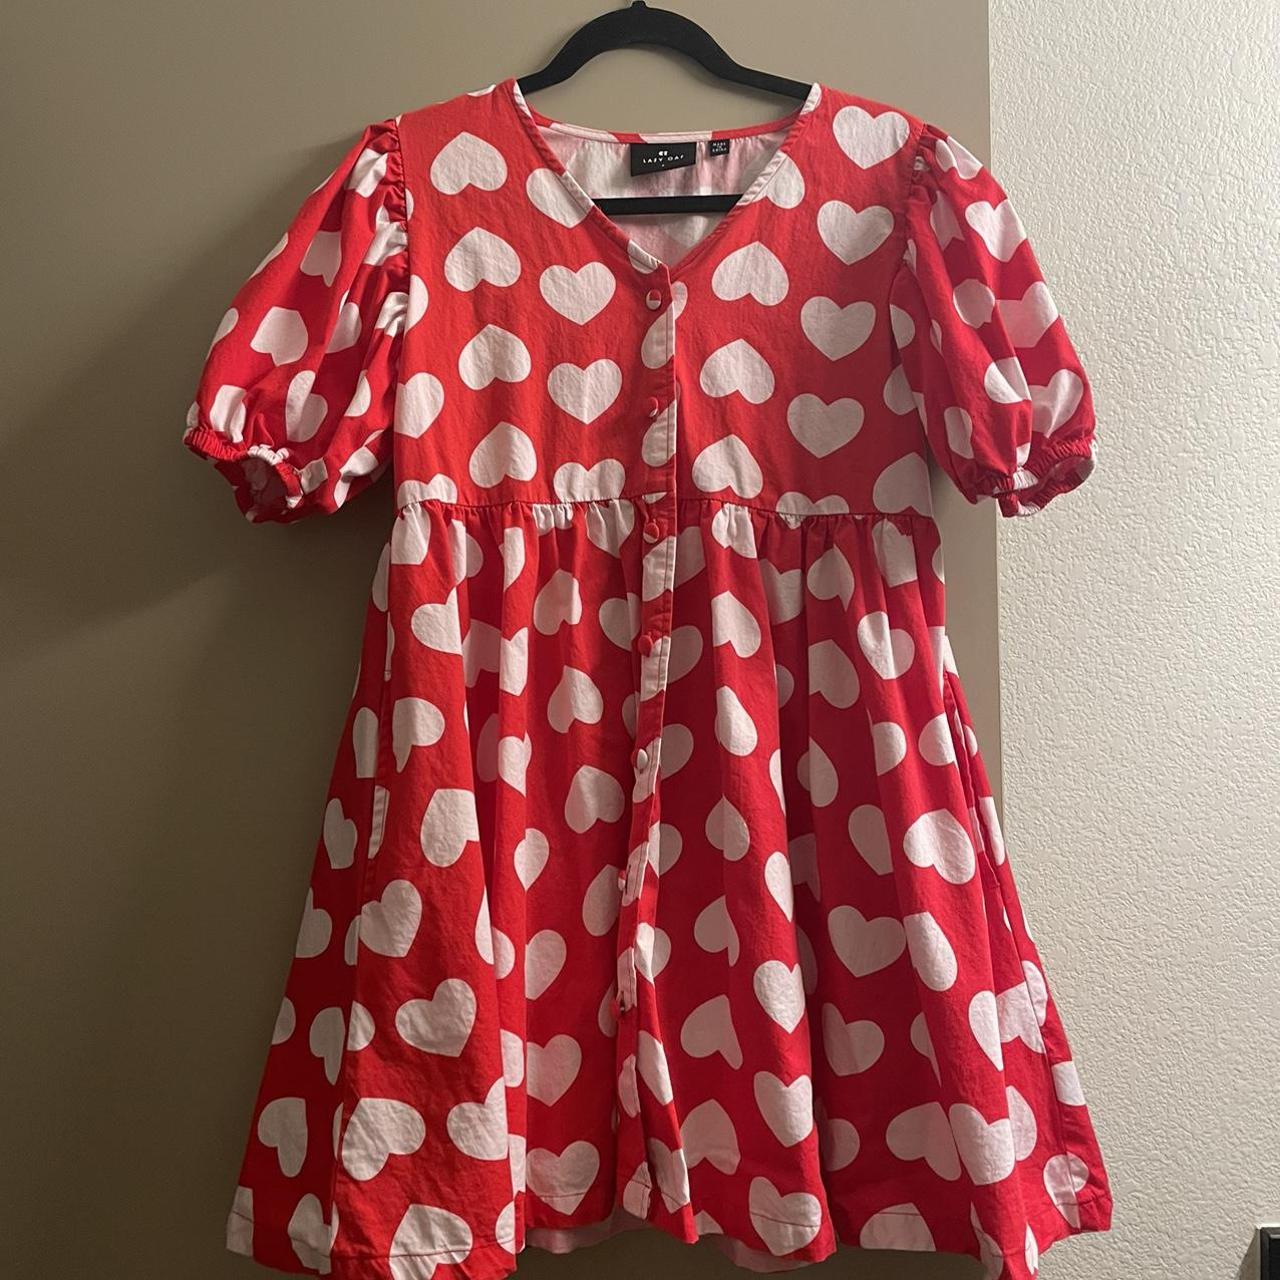 Product Image 2 - Lazy oaf red baby doll